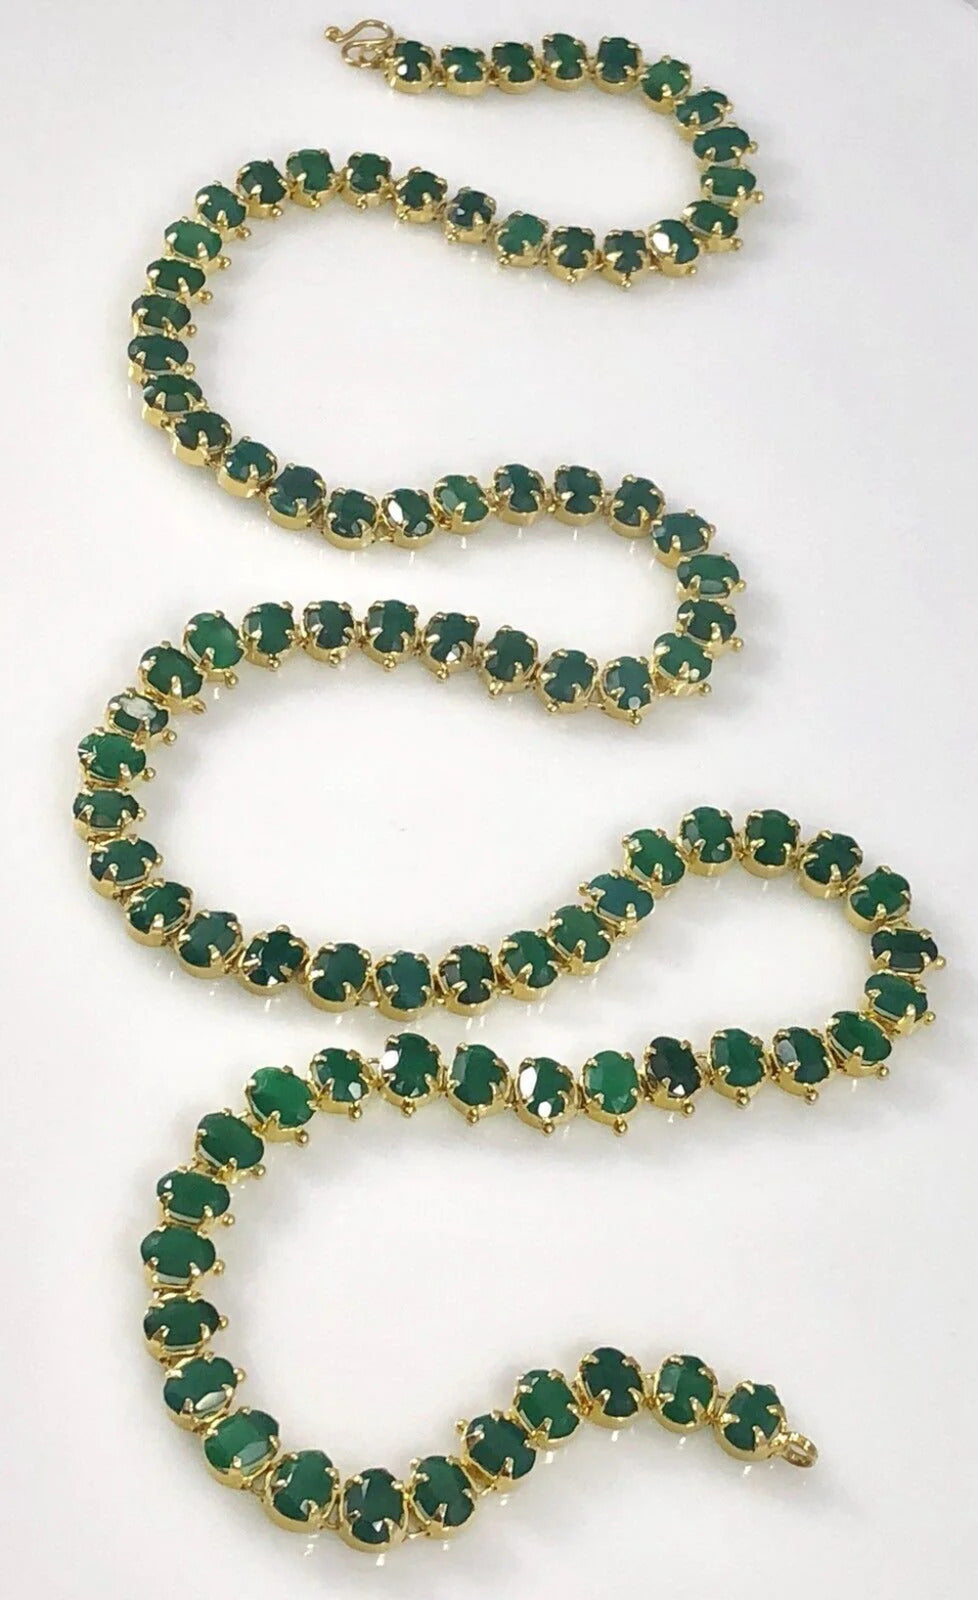 Genuine Green Chalcedony (46.5ctw) 18kt Yellow Gold Overlay Necklace, 24", New